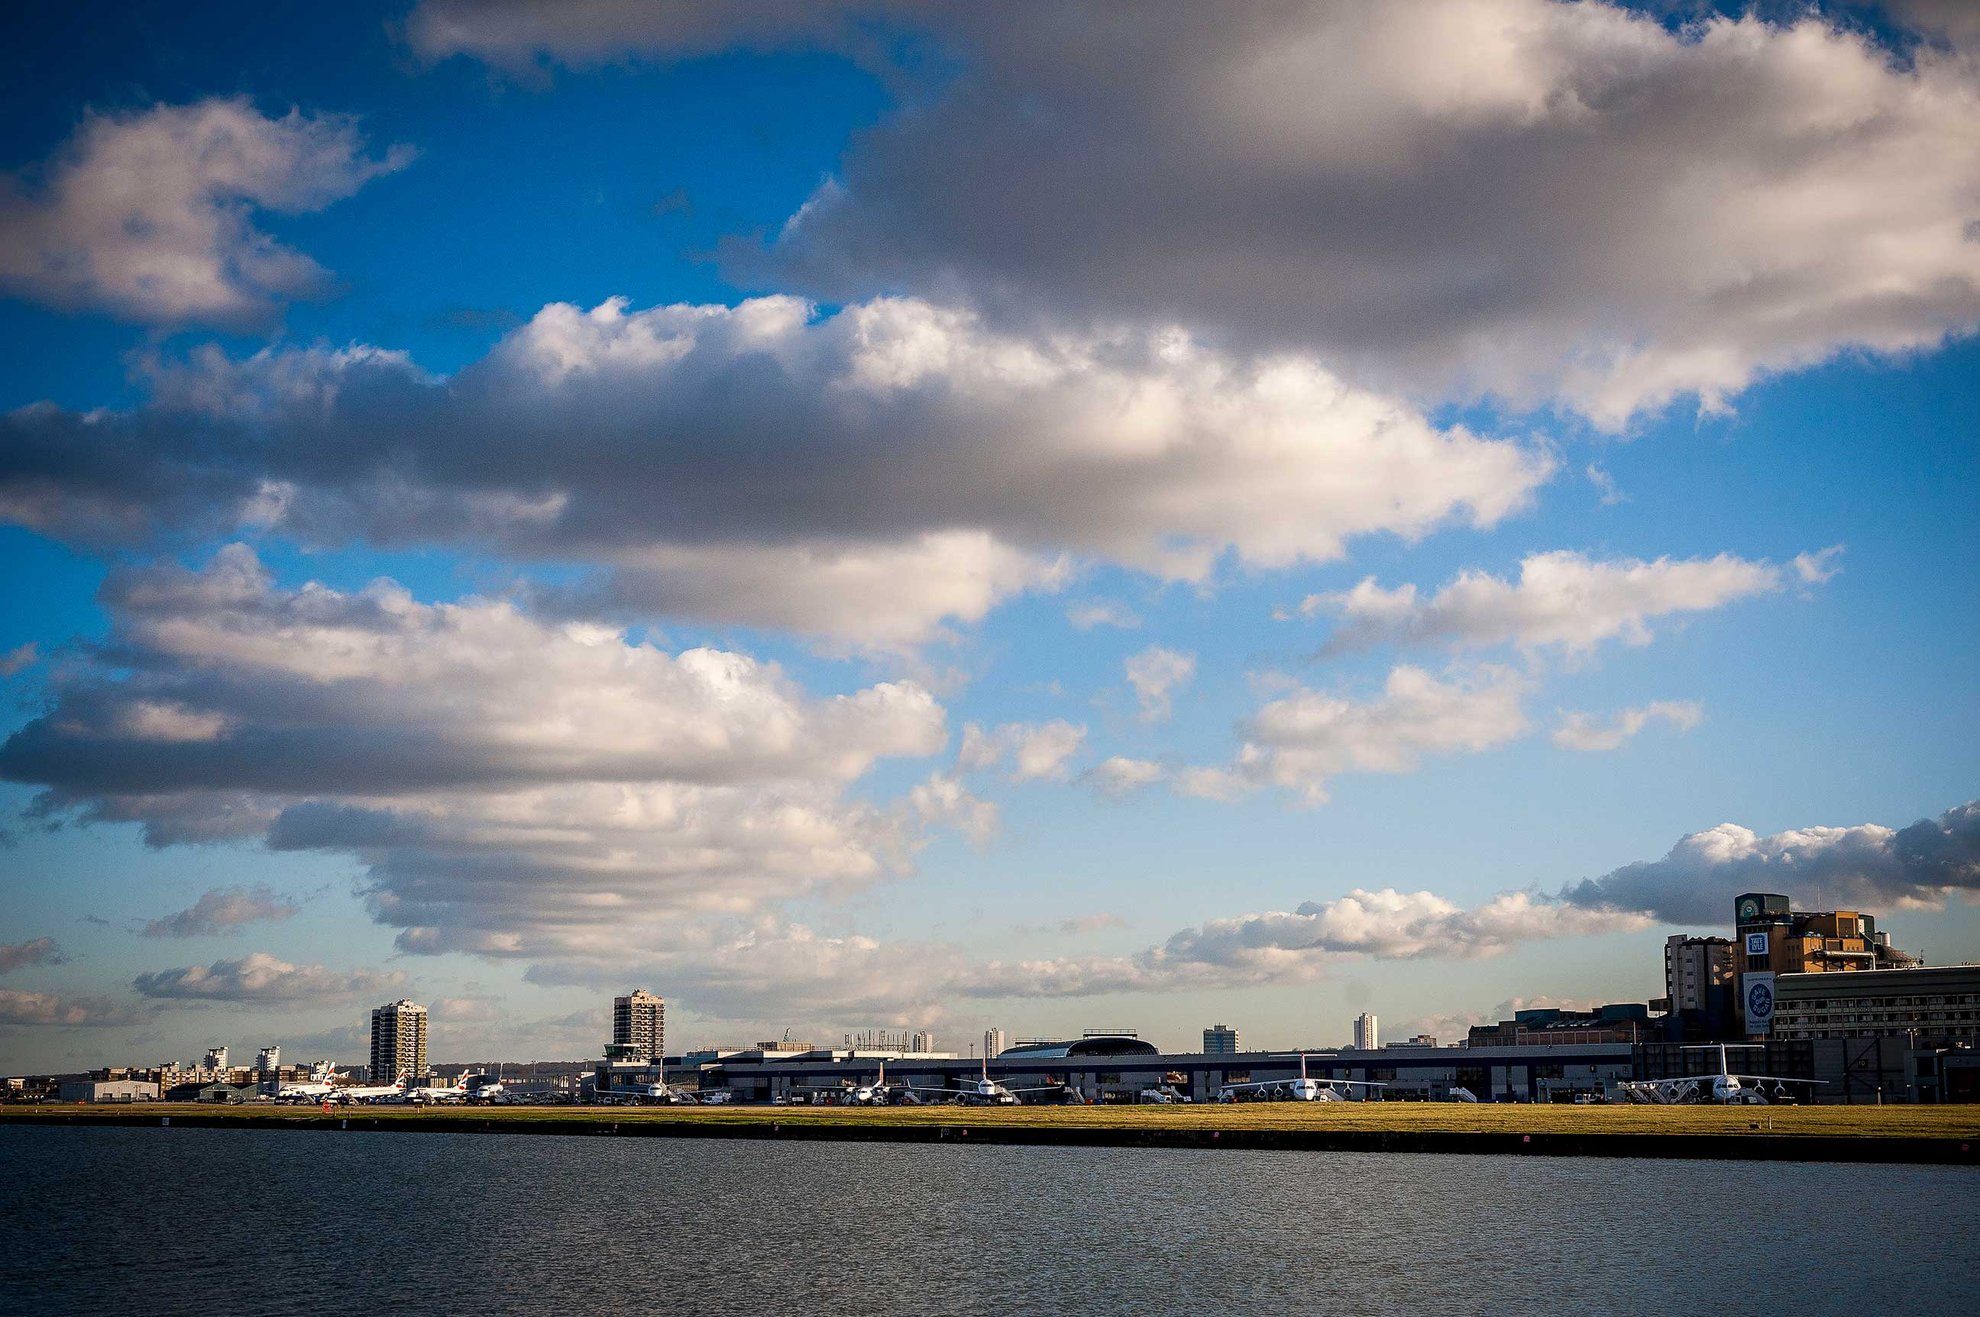 London City Airport from the Royal Albert Dock